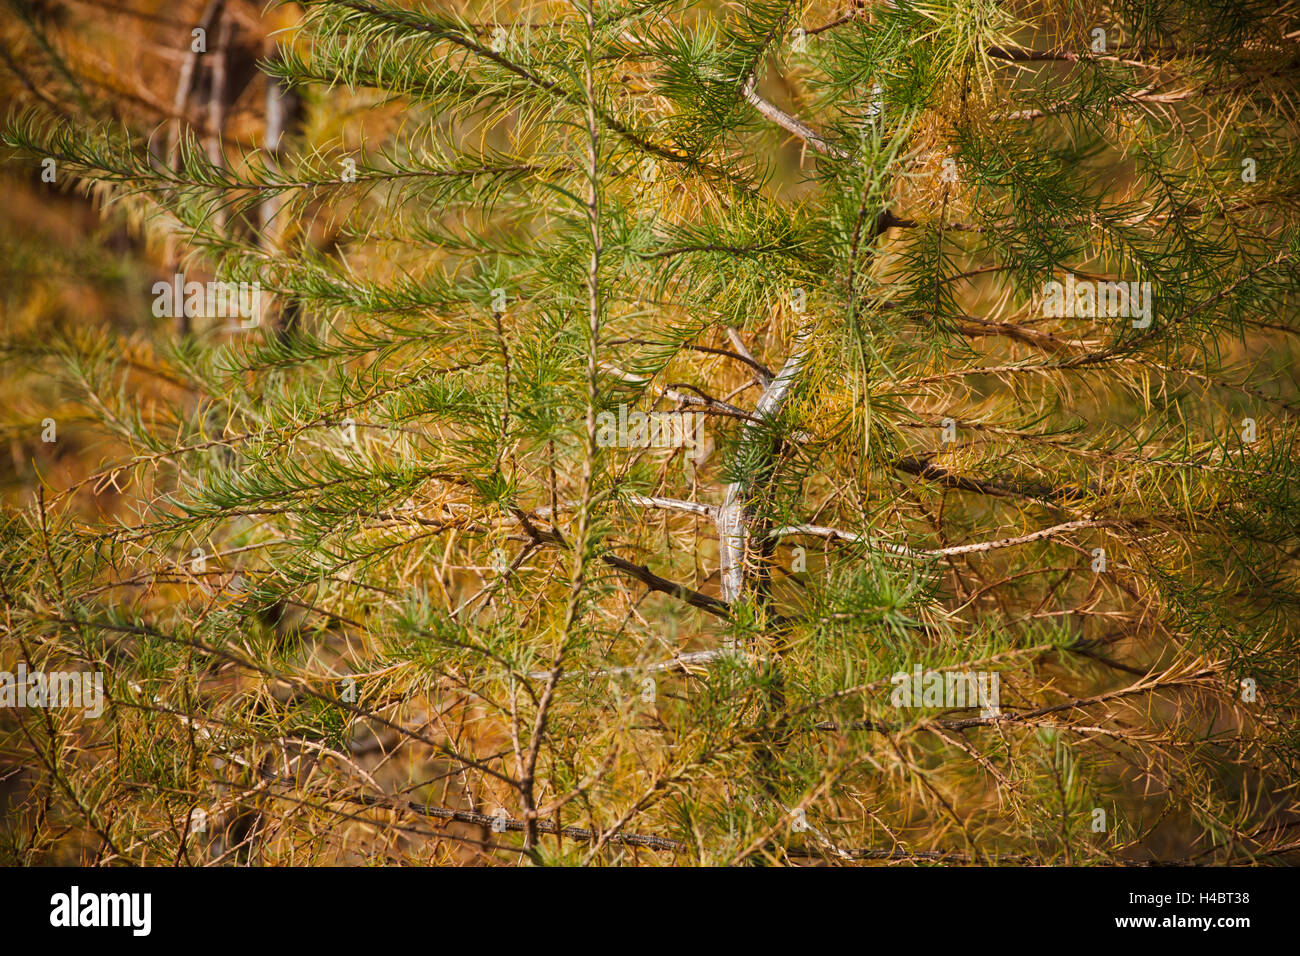 Larch in autumn with golden needles Stock Photo